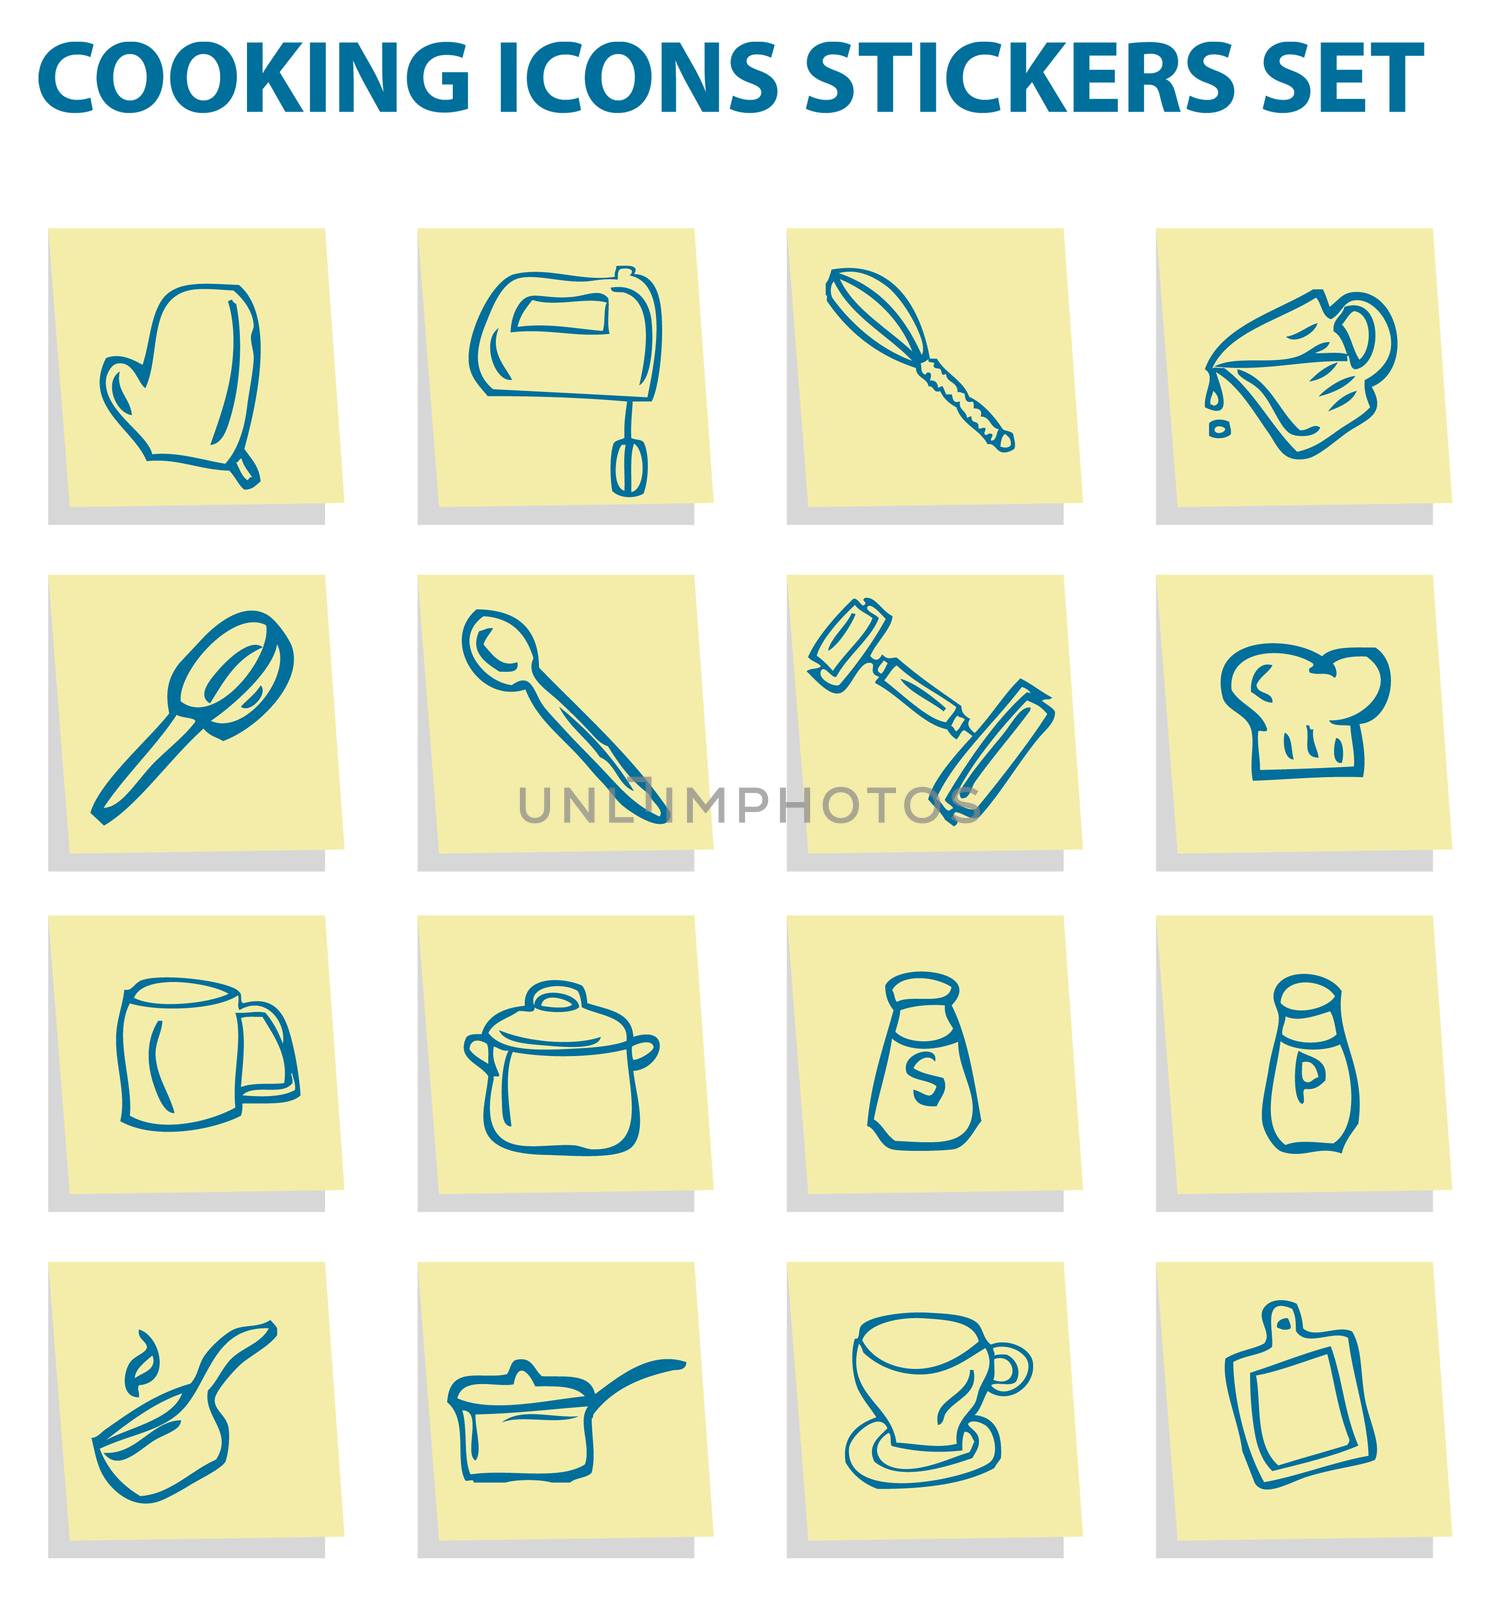 Cooking icons stickers set, kitchen elements 1 by IconsJewelry